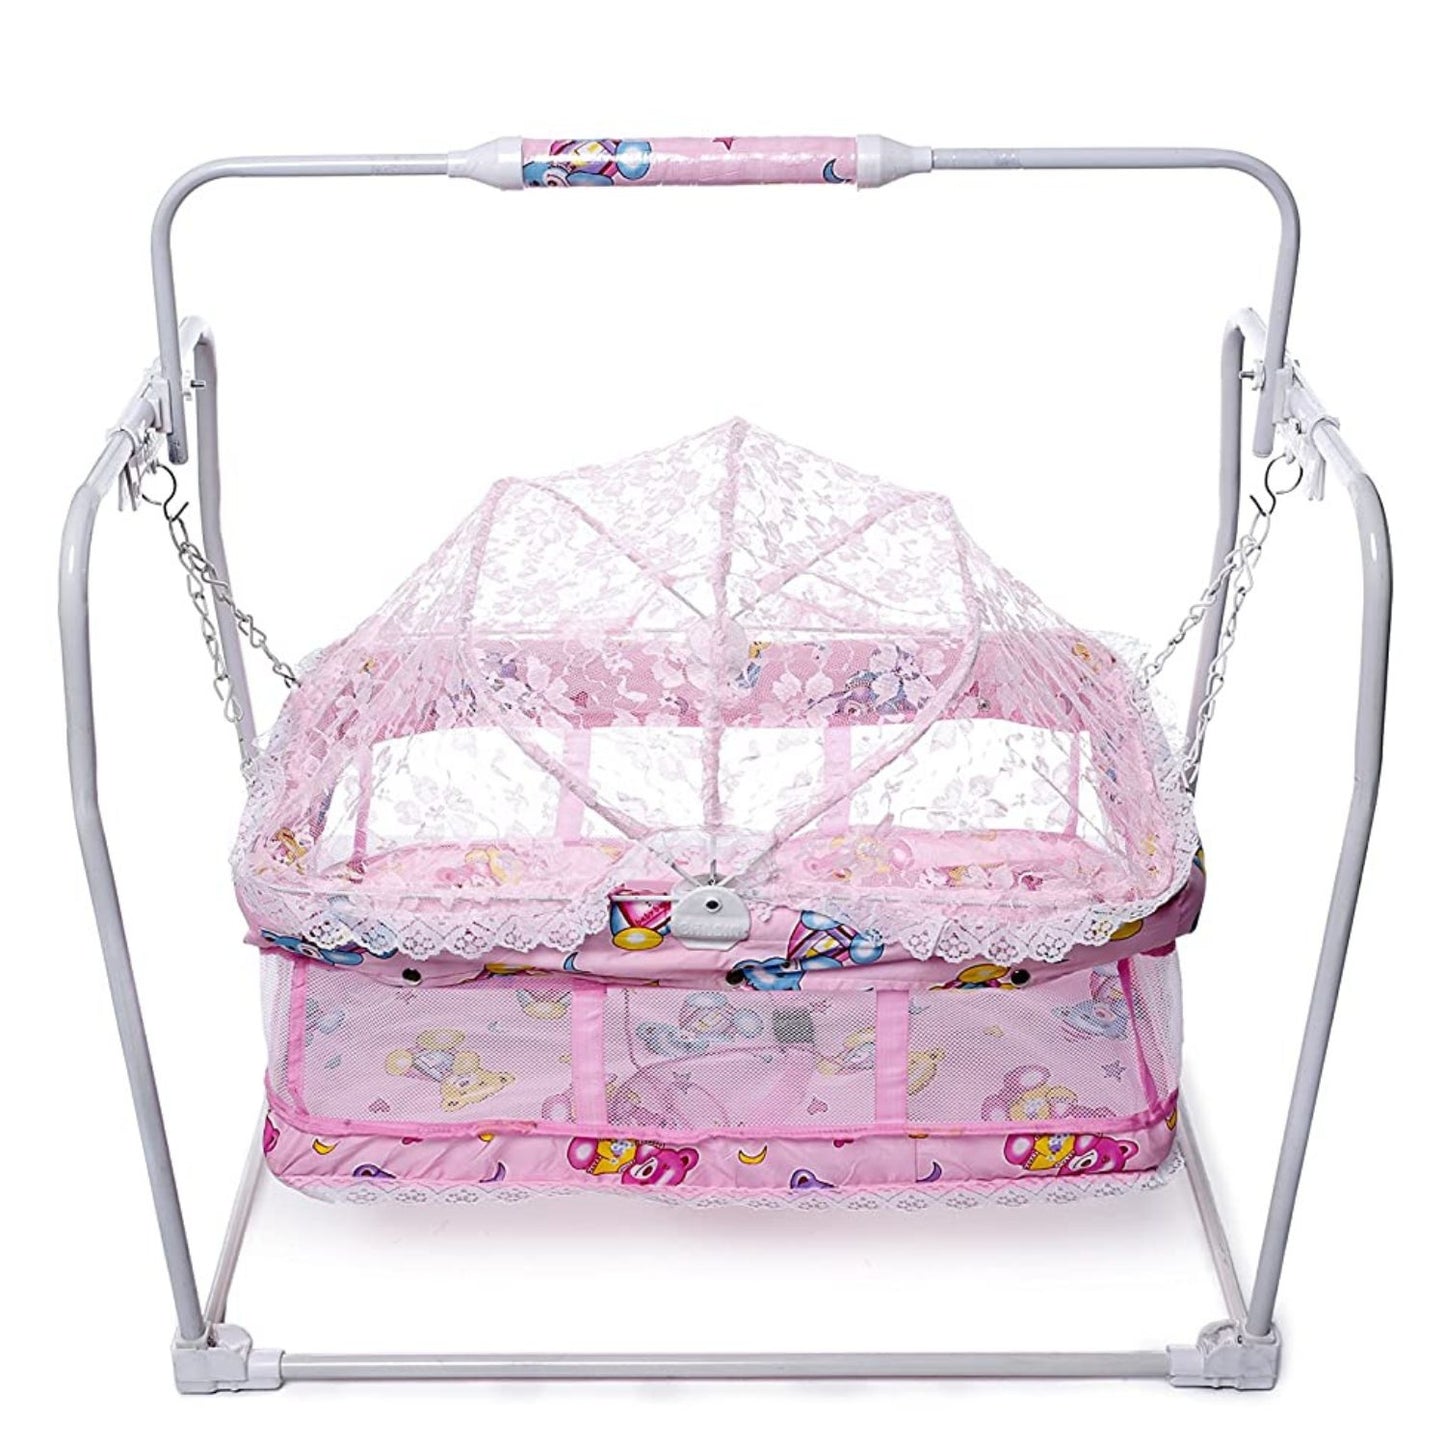 Bhasin Mobile Swing Compact Cradle Jhulla With Mosquito Net , Safe Confirtable And Deep For 0+ Month Baby